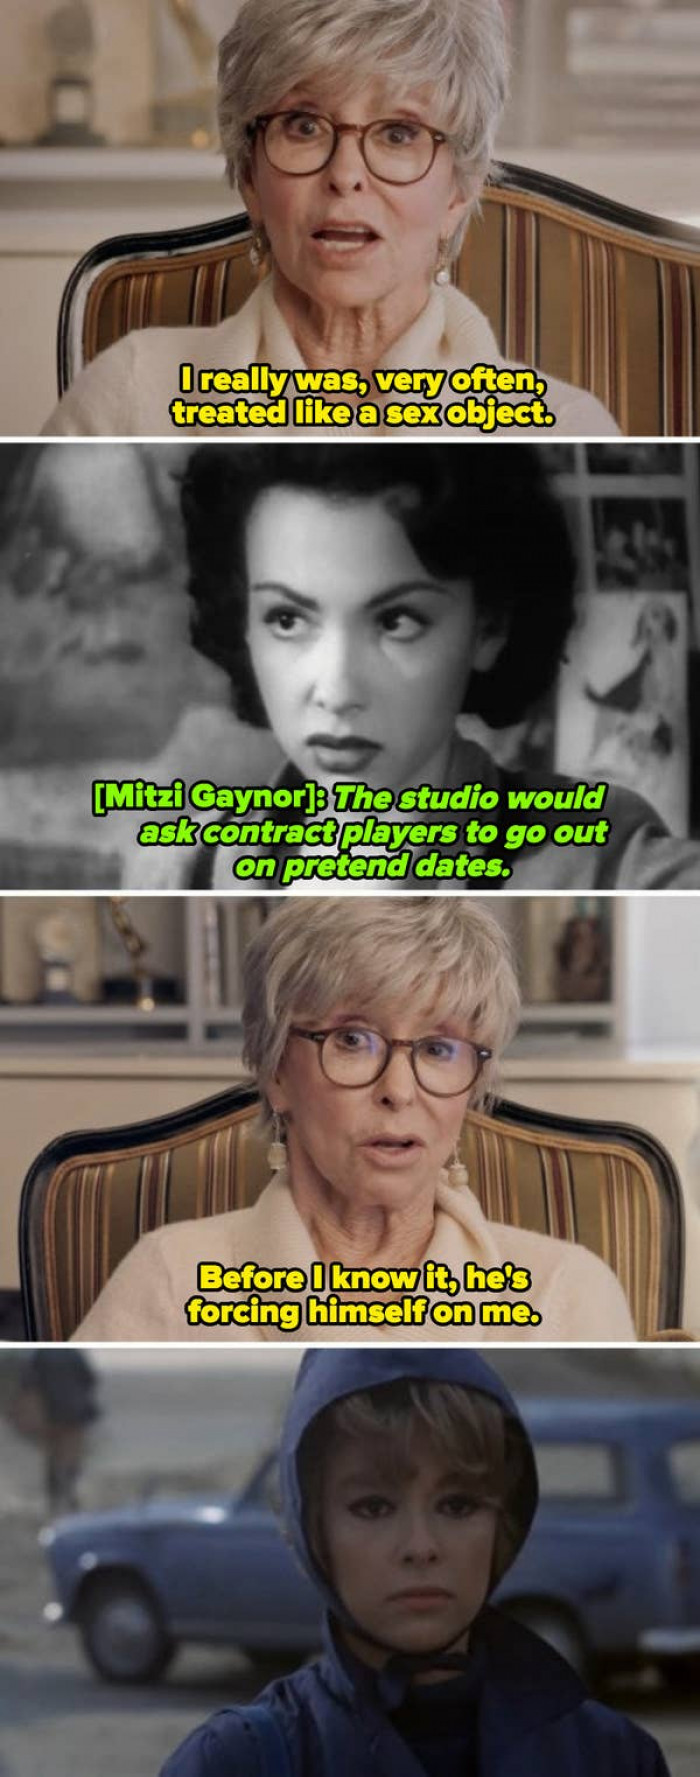 5. Rita Moreno: Just a Girl Who Decided to Go for It (2021)